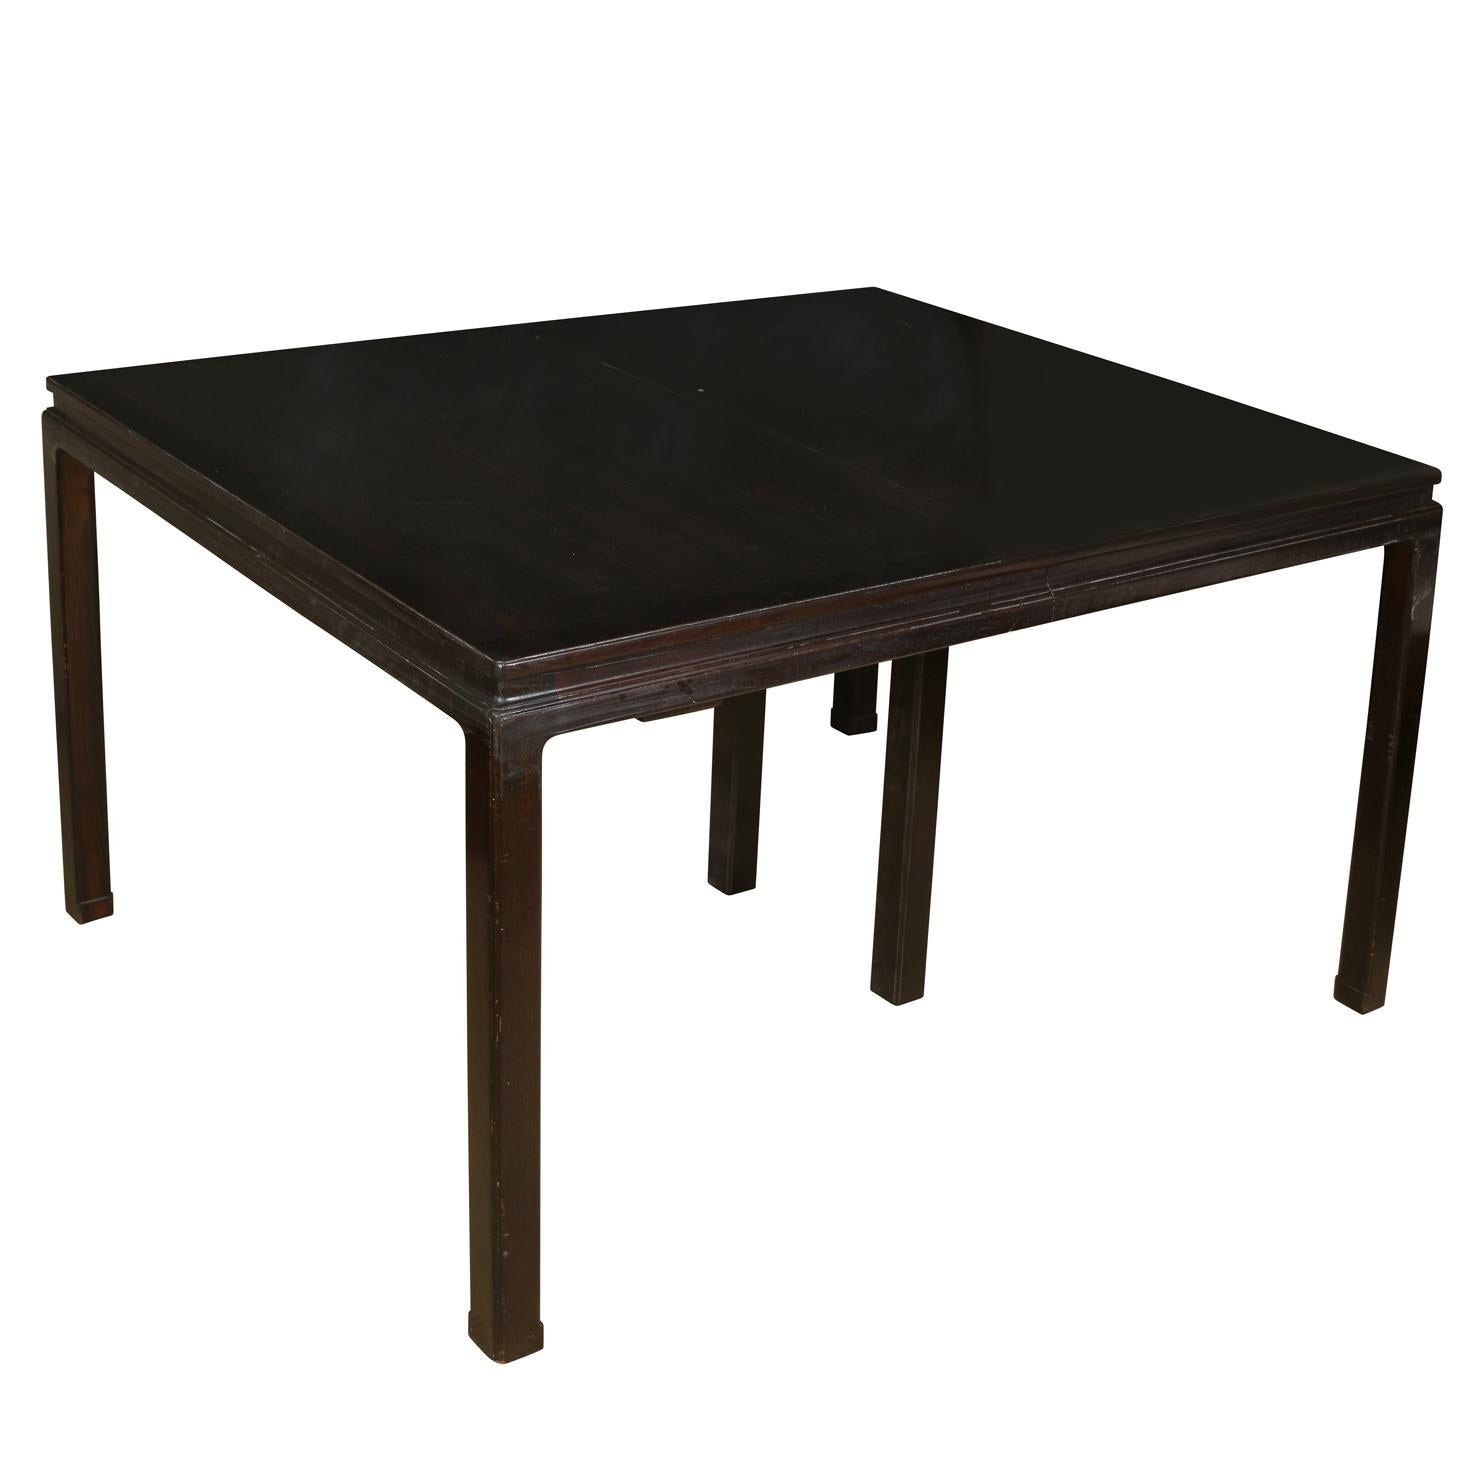 Dunbar Style Lacquered Dining Table with Two Leaves In Good Condition For Sale In Locust Valley, NY